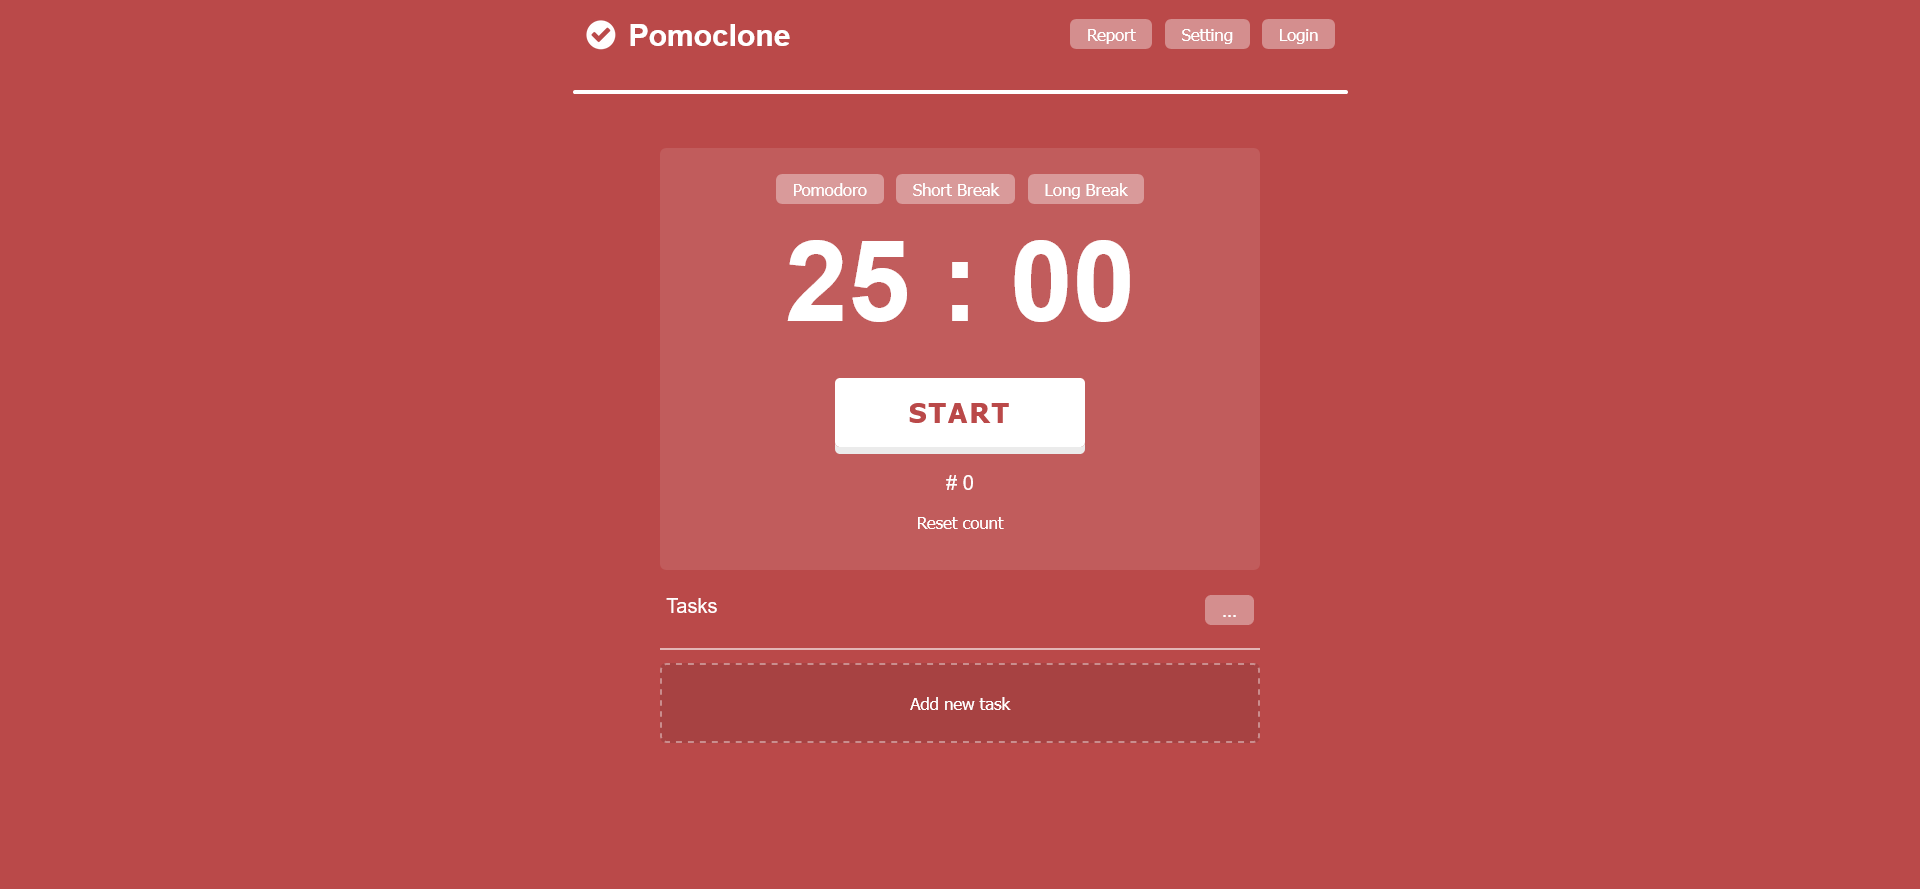 Image link to pomoclone website